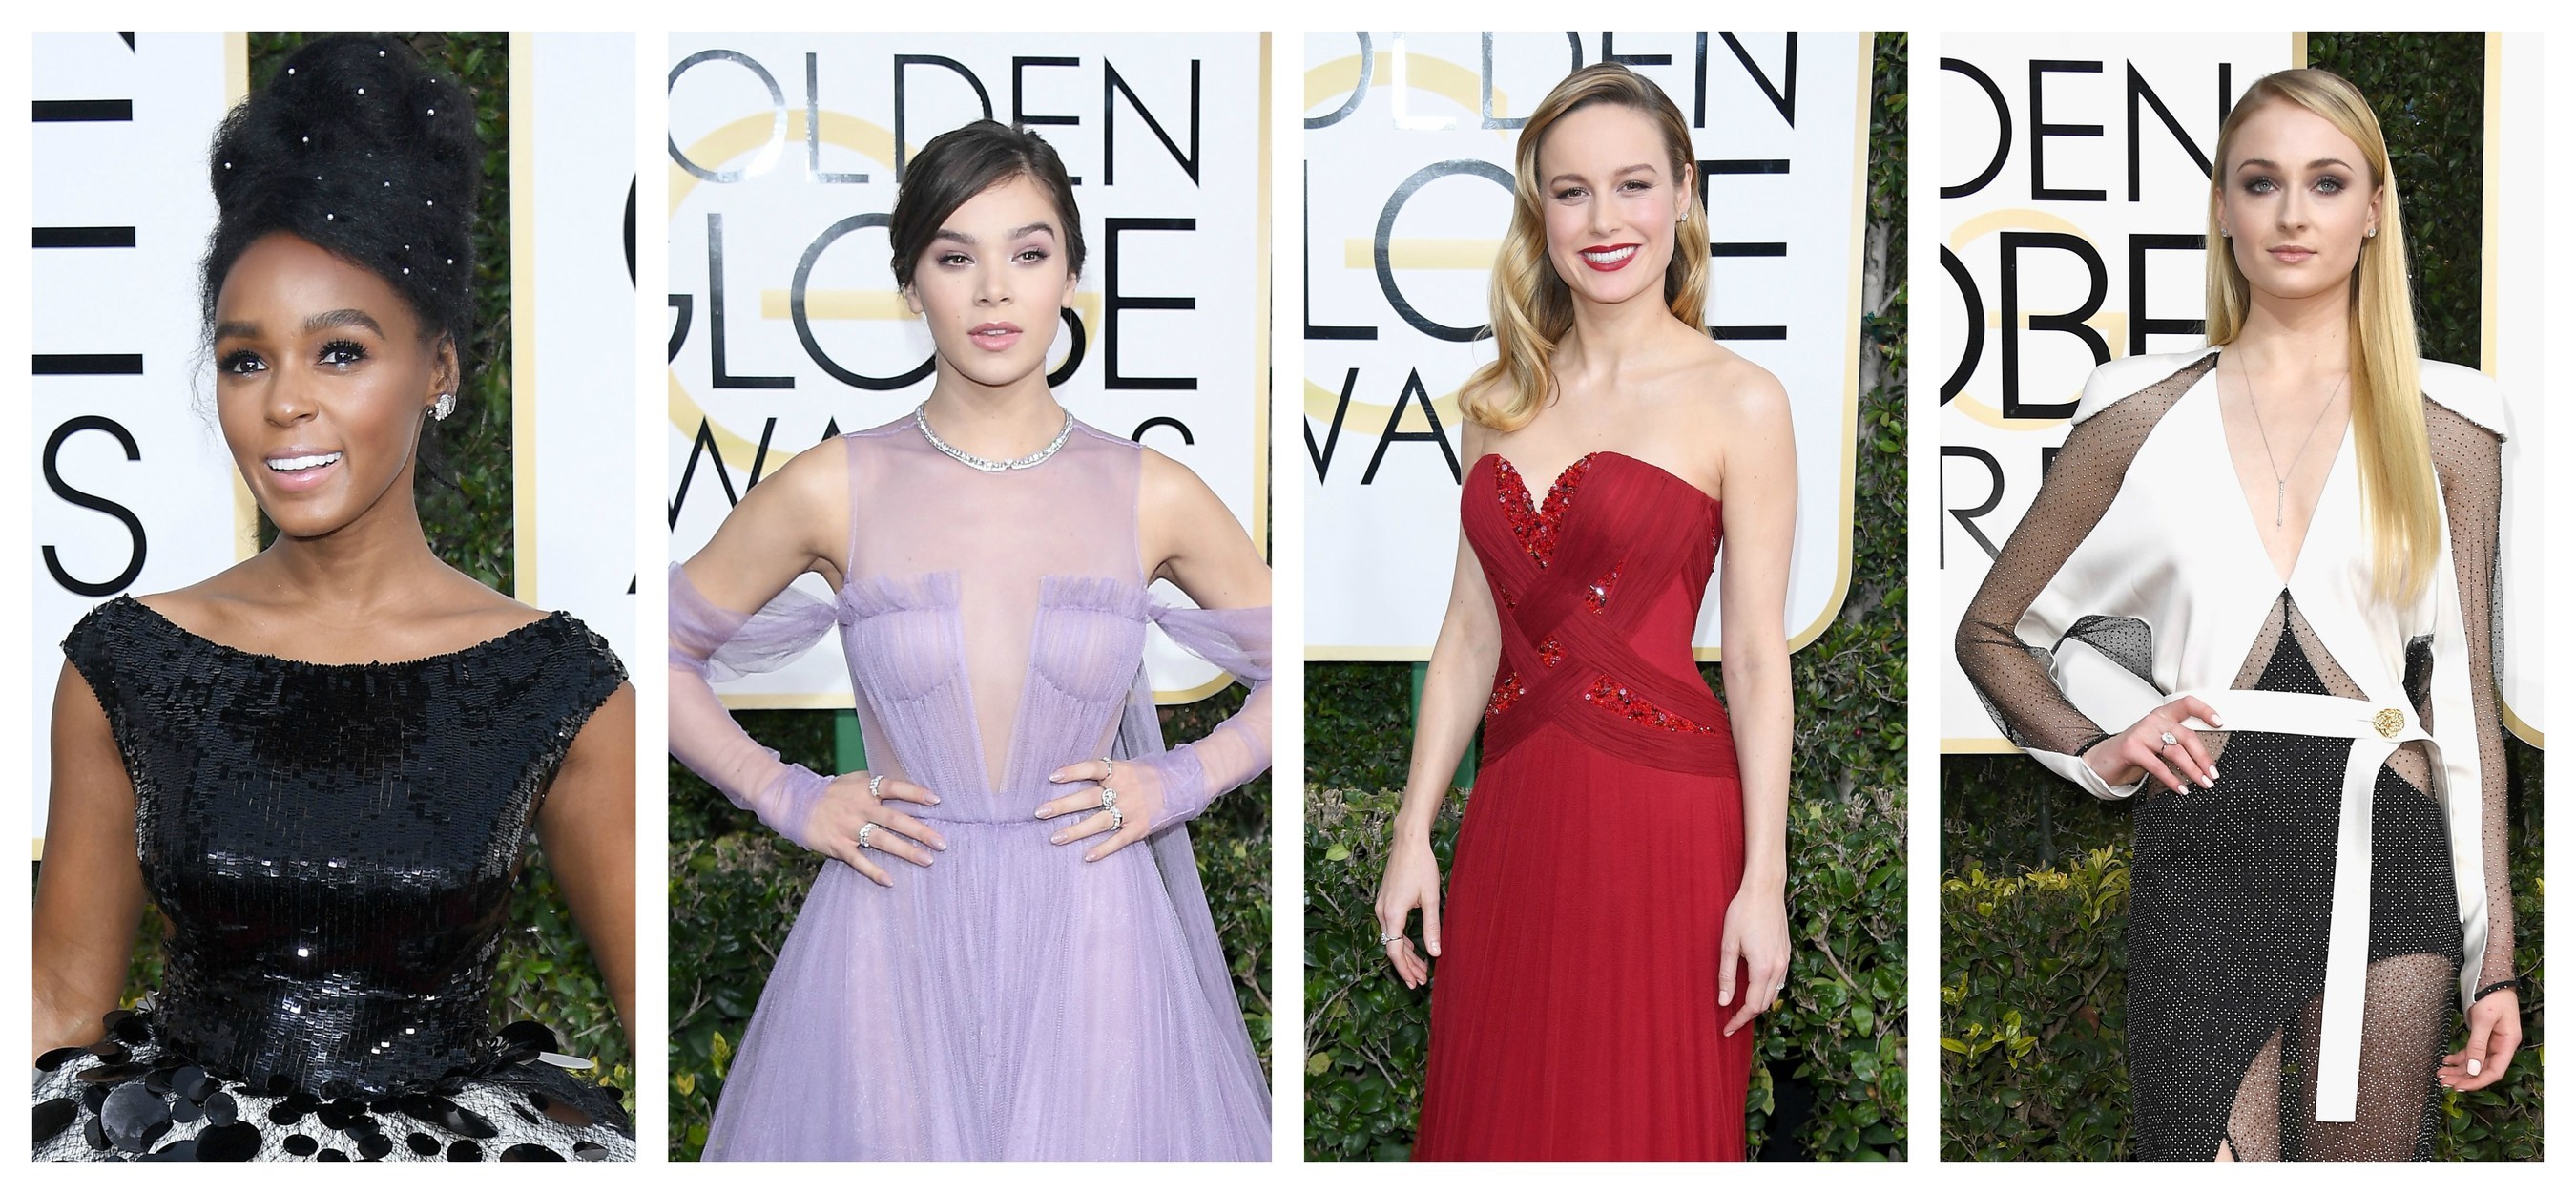 Janelle Monáe, Hailee Steinfeld, Brie Larson, and Sophie Turner Sparkle in Forevermark Diamonds at - PR Newswire (press release)